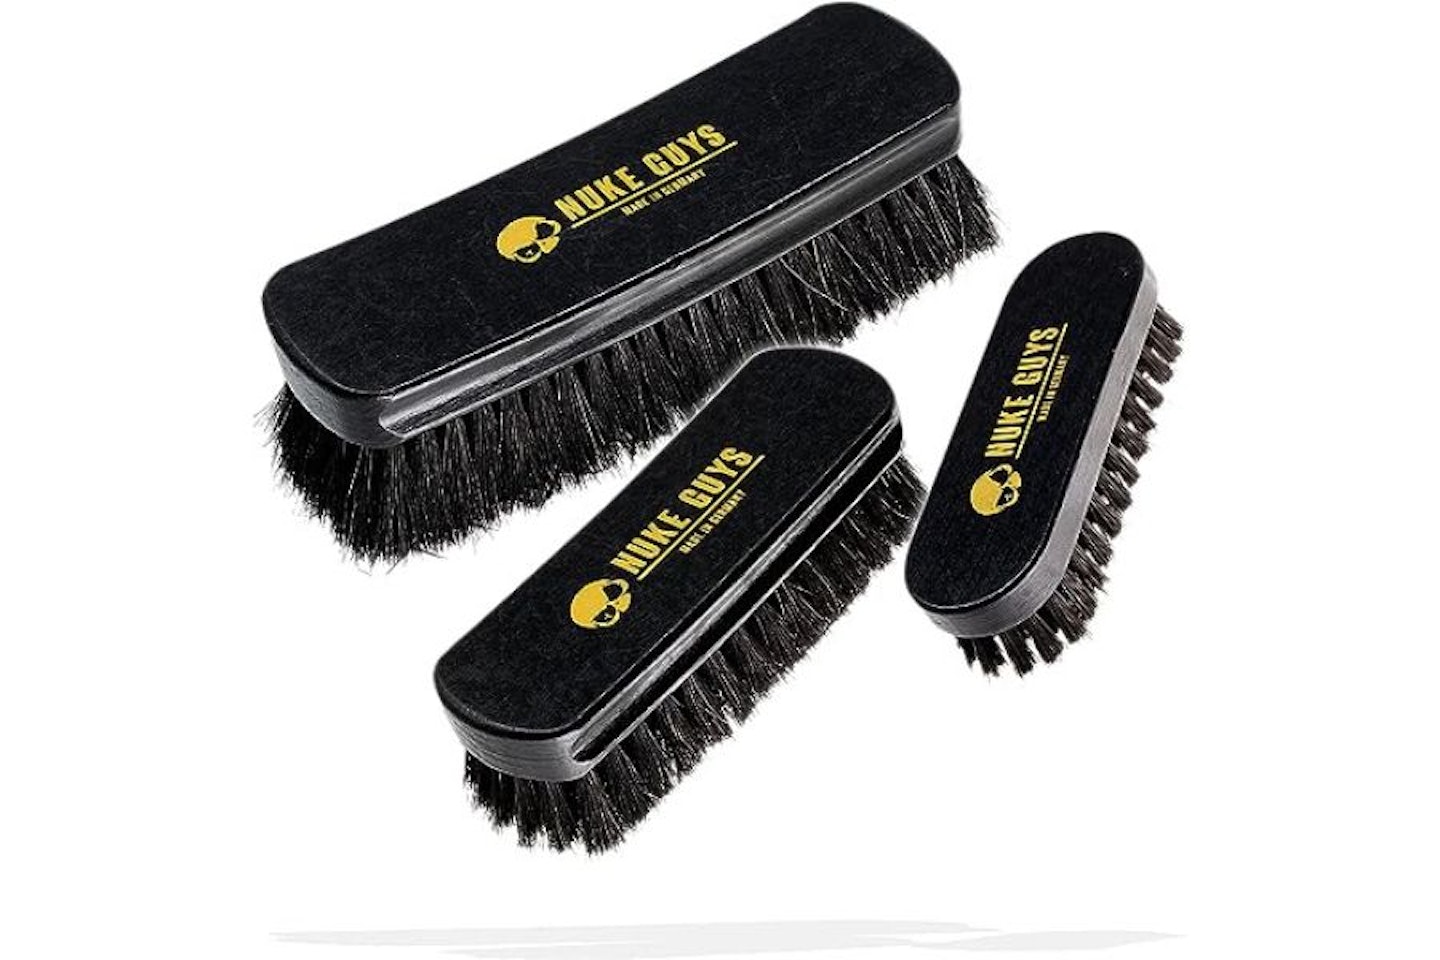 The Best Leather Cleaning Brush - Comparing For Results and